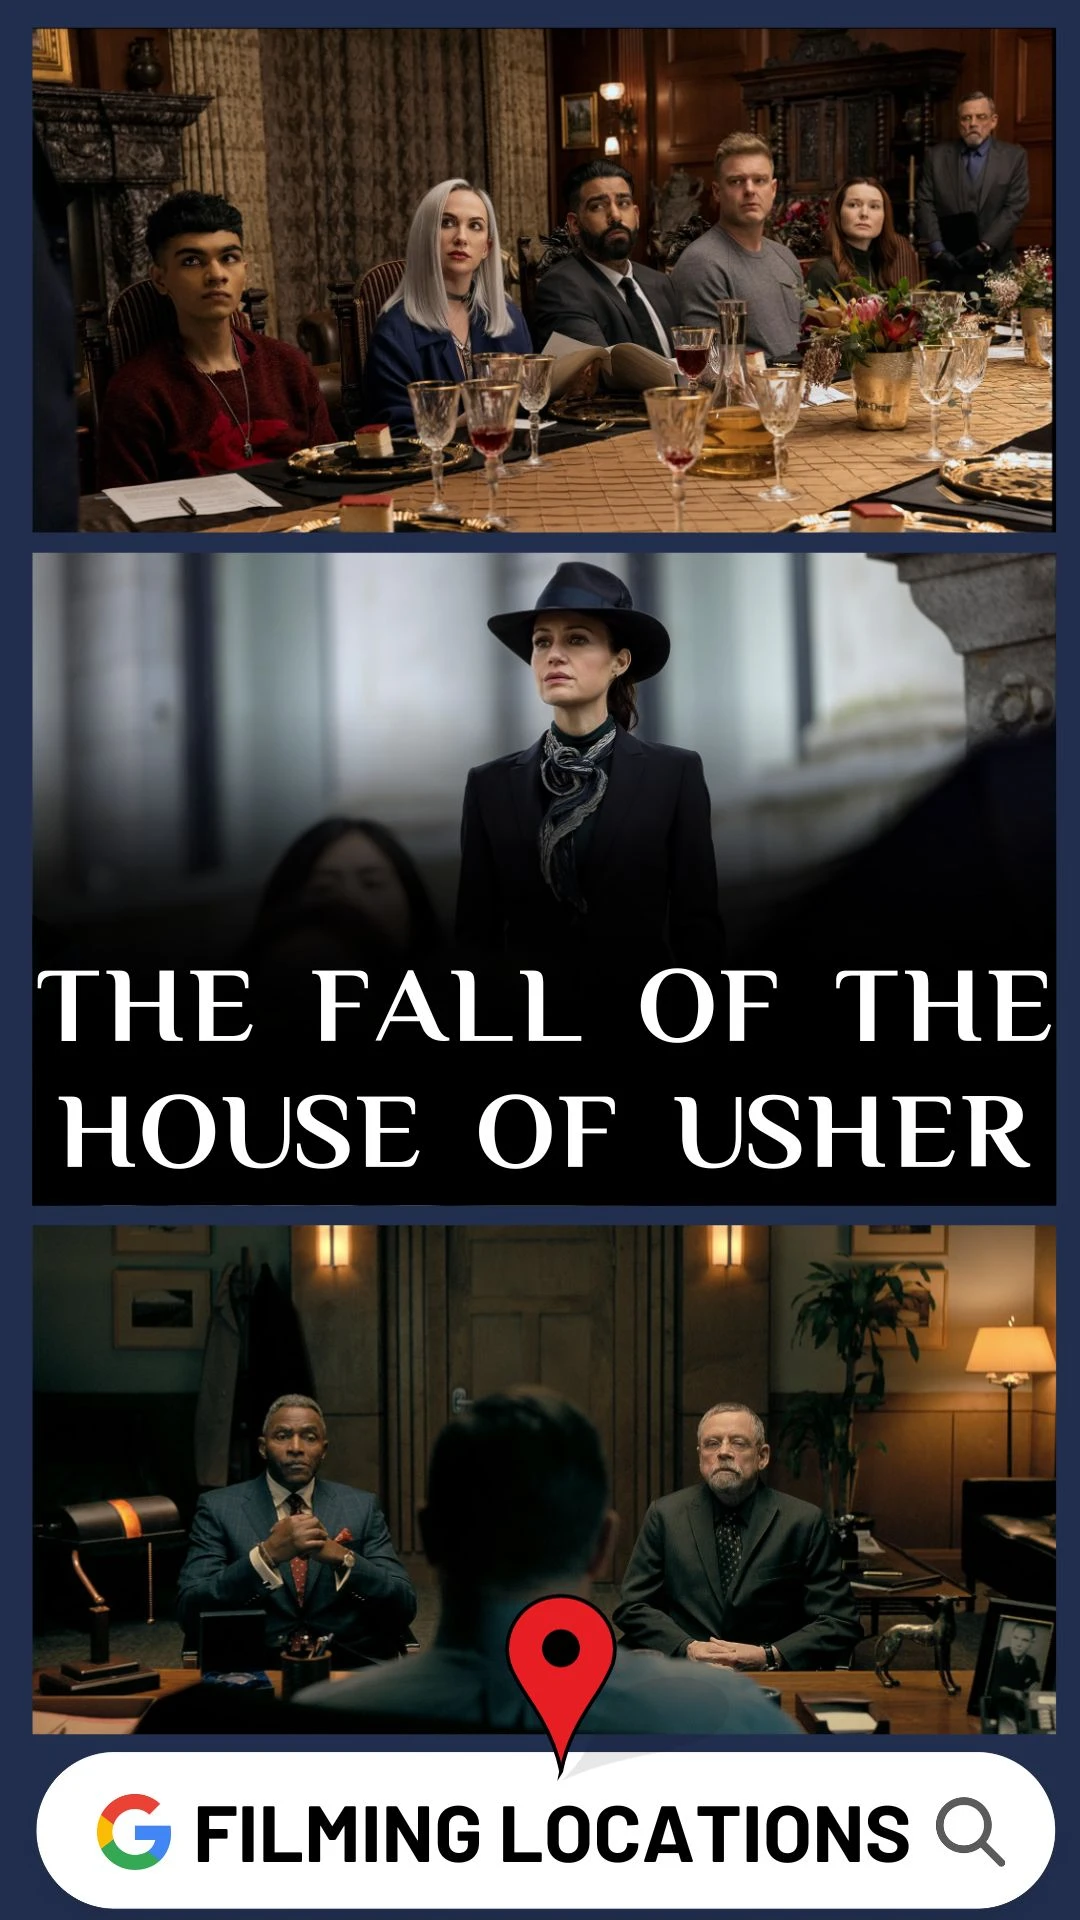 The Fall of the House of Usher Filming Locations